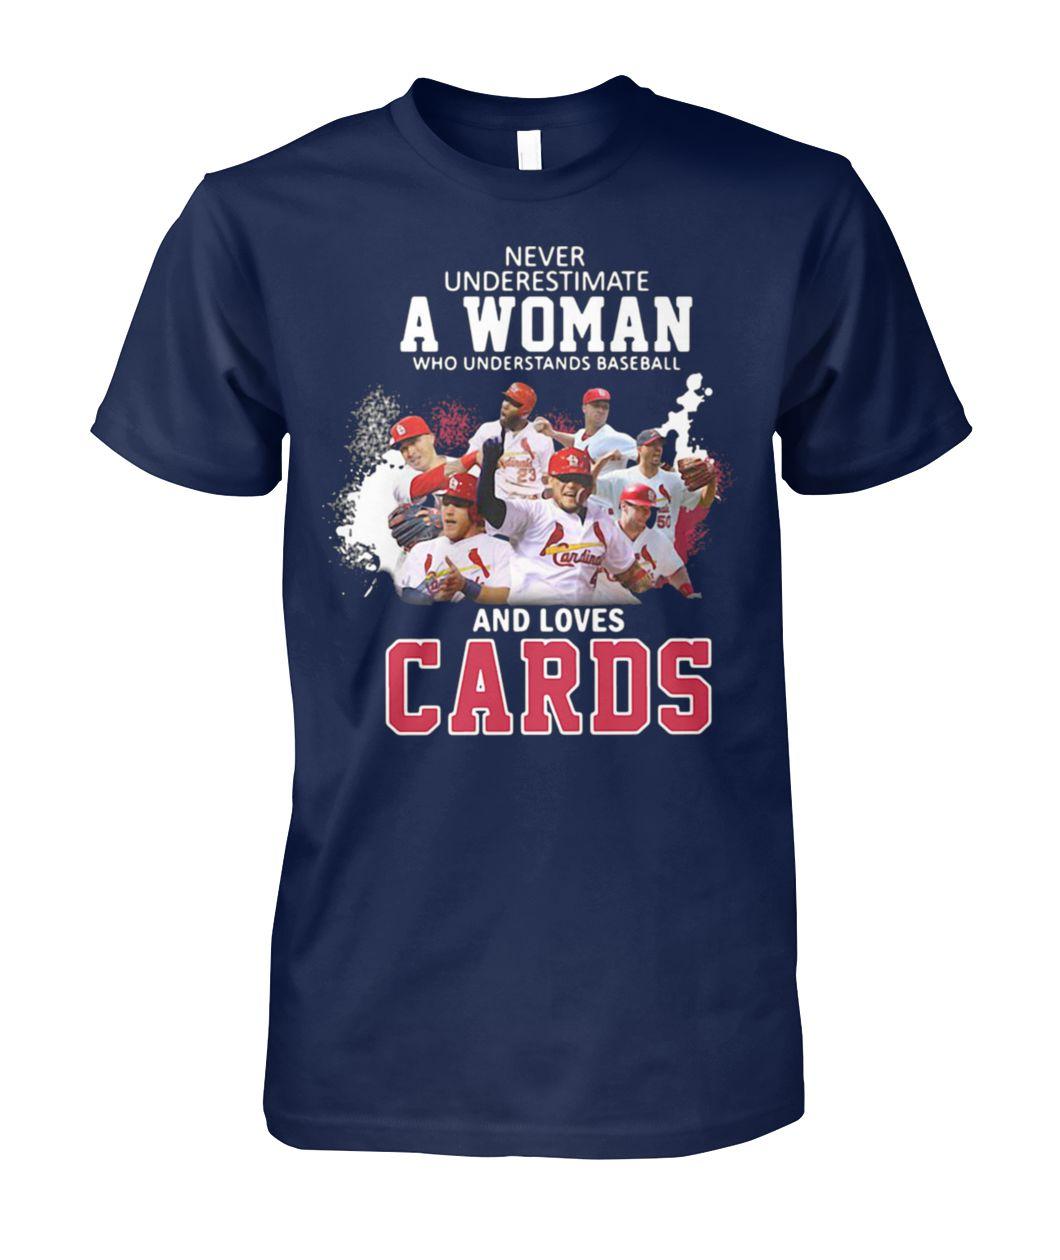 Never underestimate a woman who understands baseball and loves st louis cardinals guy shirt